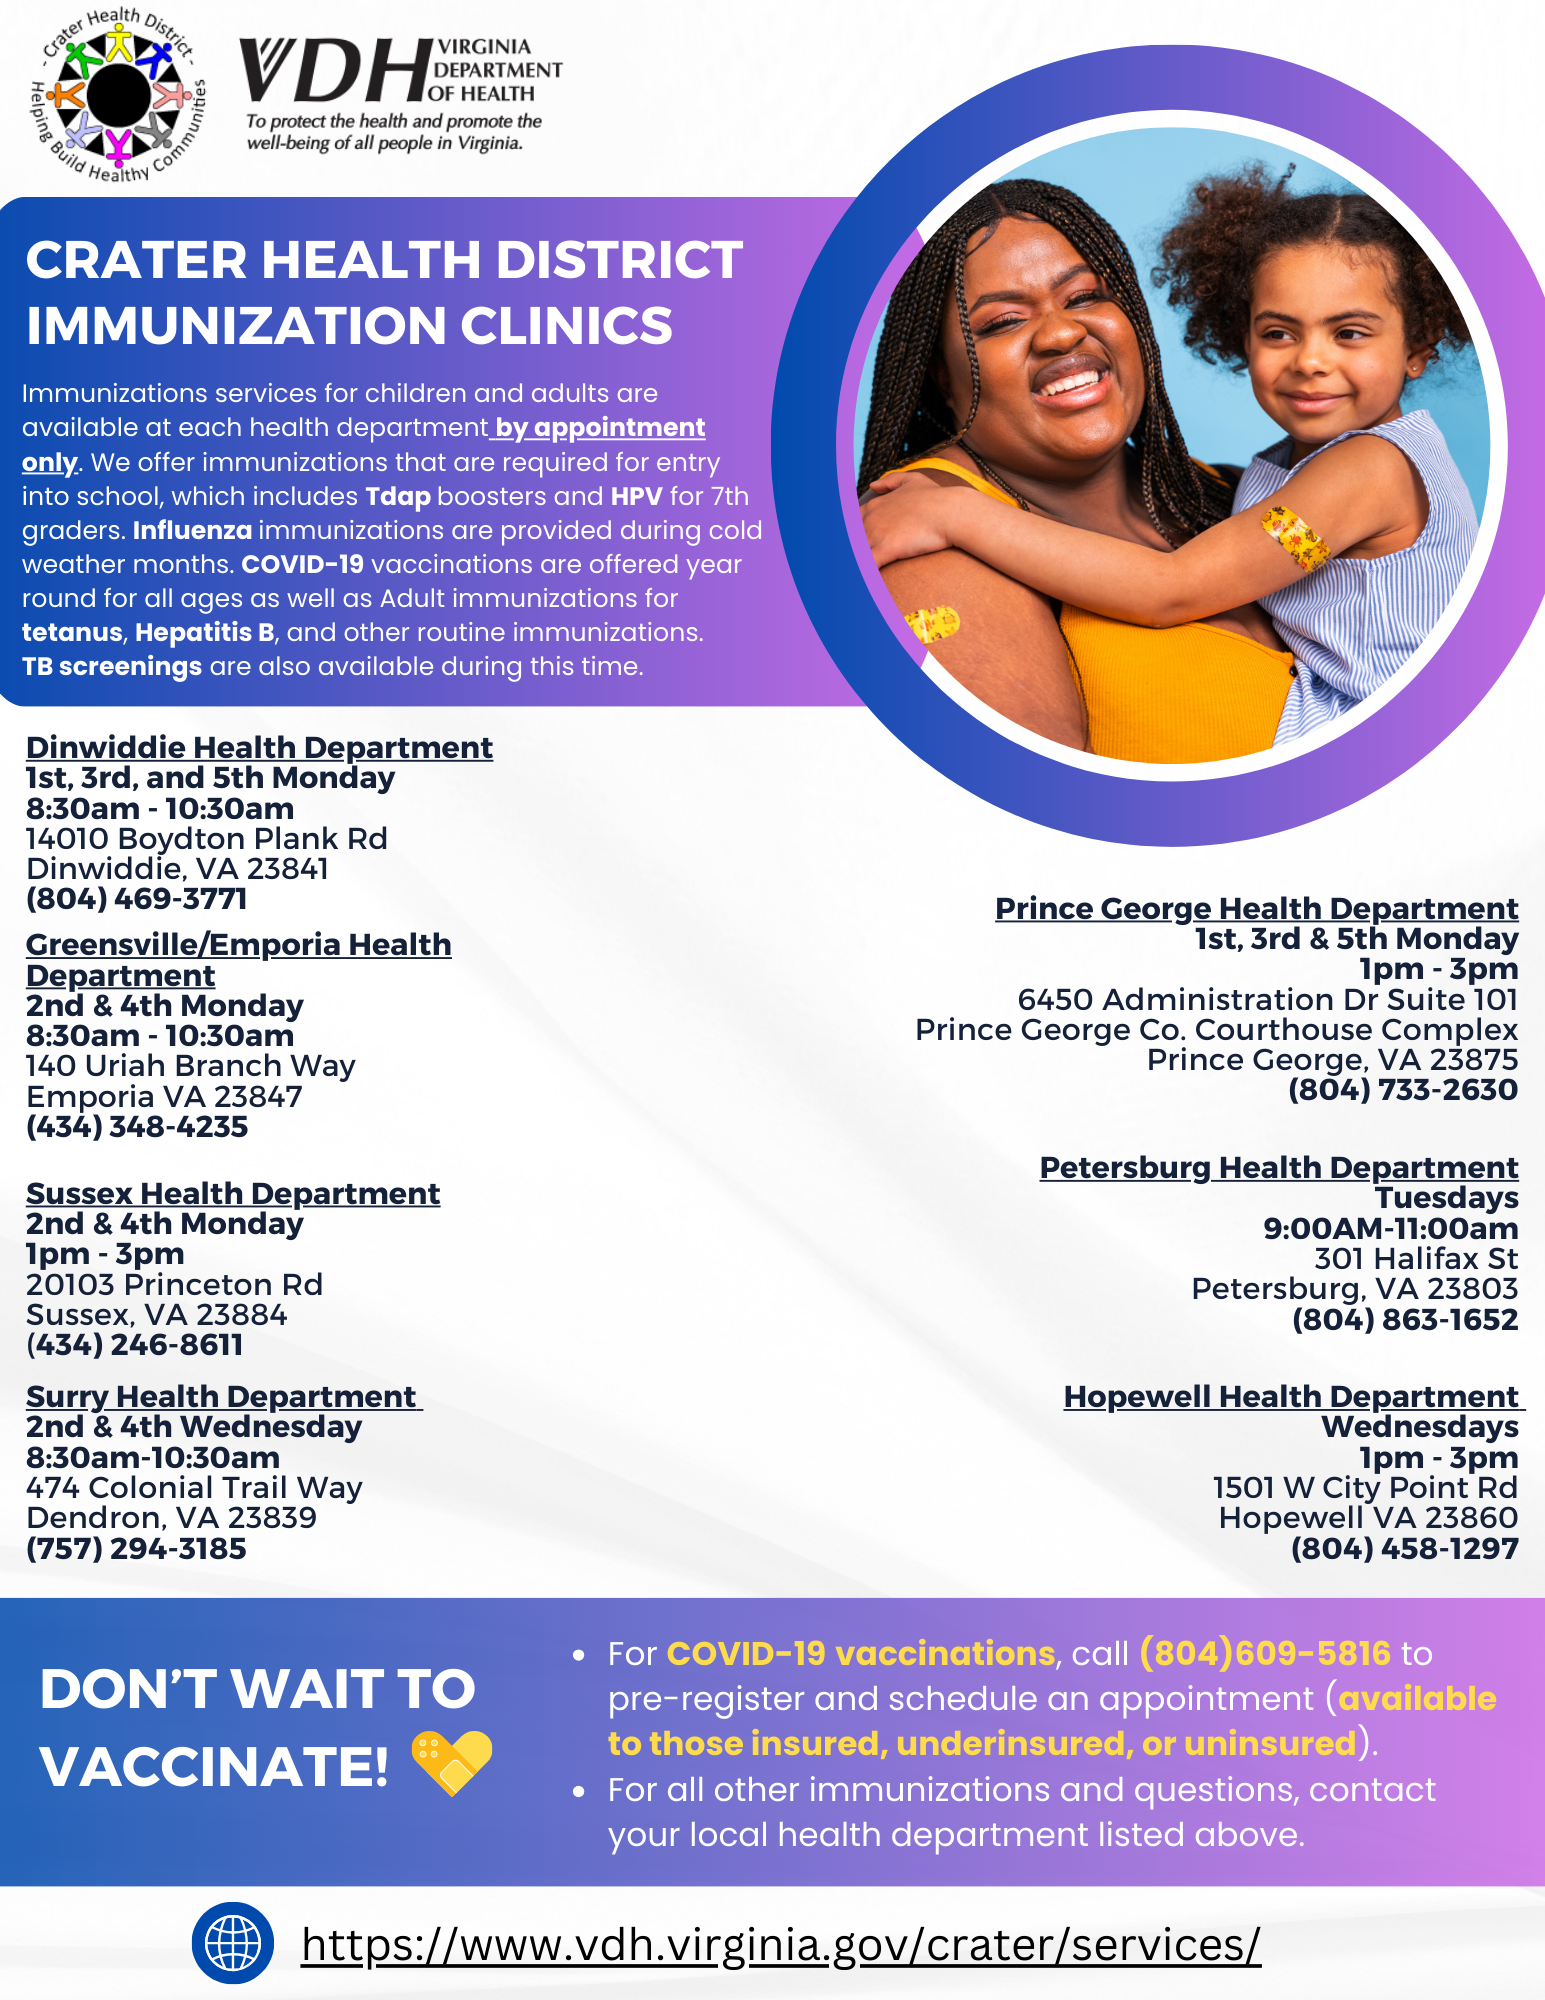 Crater District Health Departments